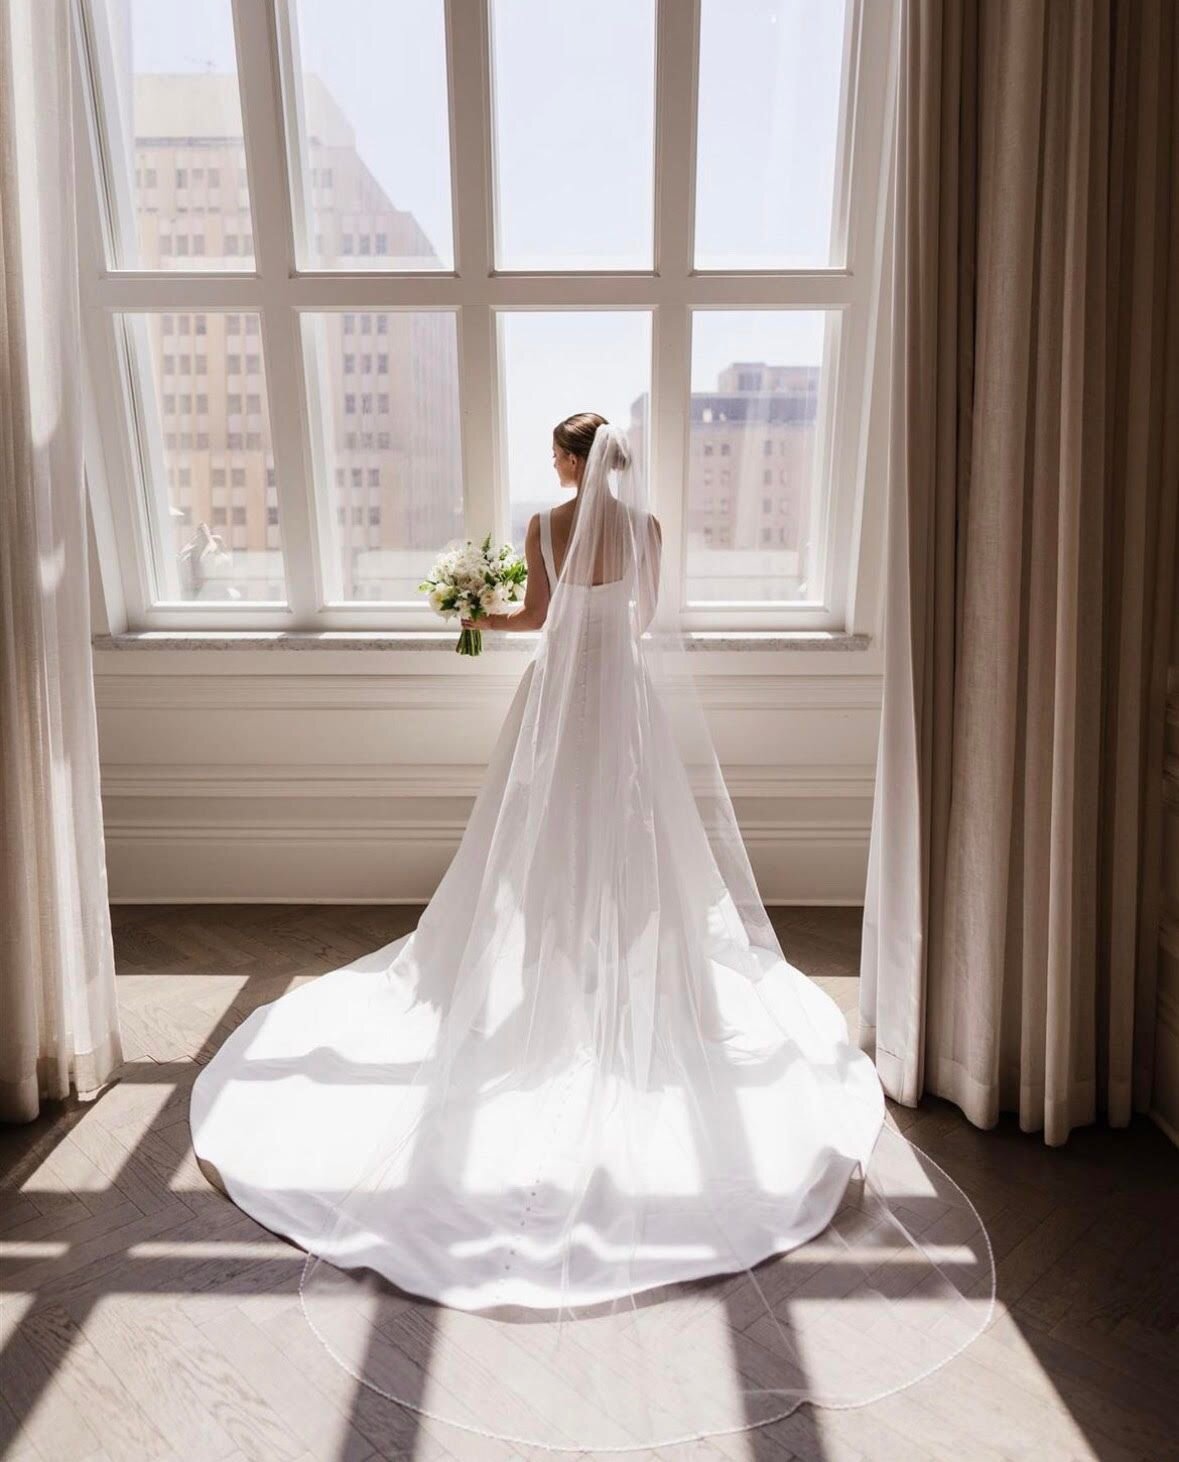 Designed with the modern-day princess in mind this Sareh Nouri style will sure get all the attention on your special day.

Exclusively available in our boutique.

#luxurybride #nybfw #weddingfashion #dreamwedding #nycbride #wedding2023 #bridetobe #br